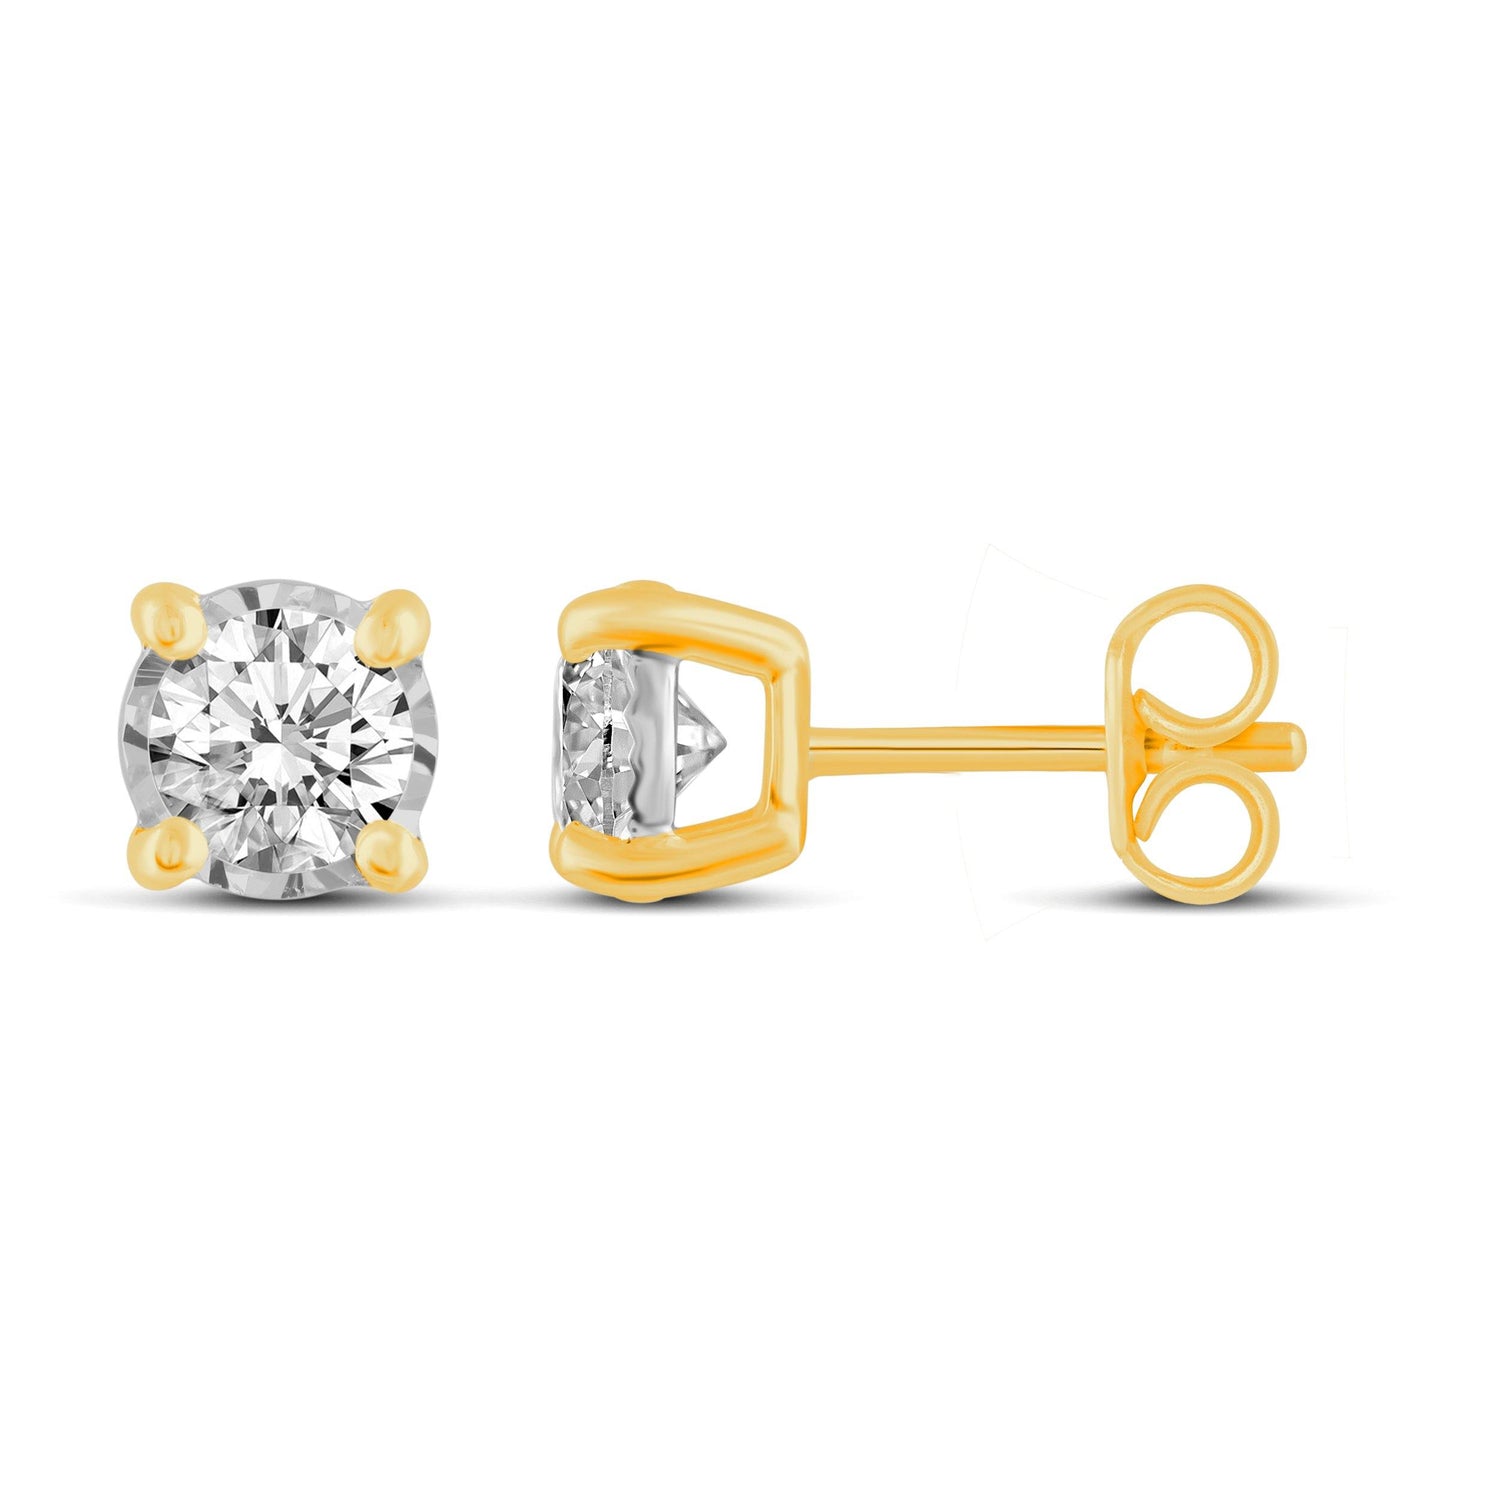 3/8Cttw Diamond Stud Earrings Set In 14K Gold. Your choice In White, Yellow Or Rose Gold - Fifth and Fine